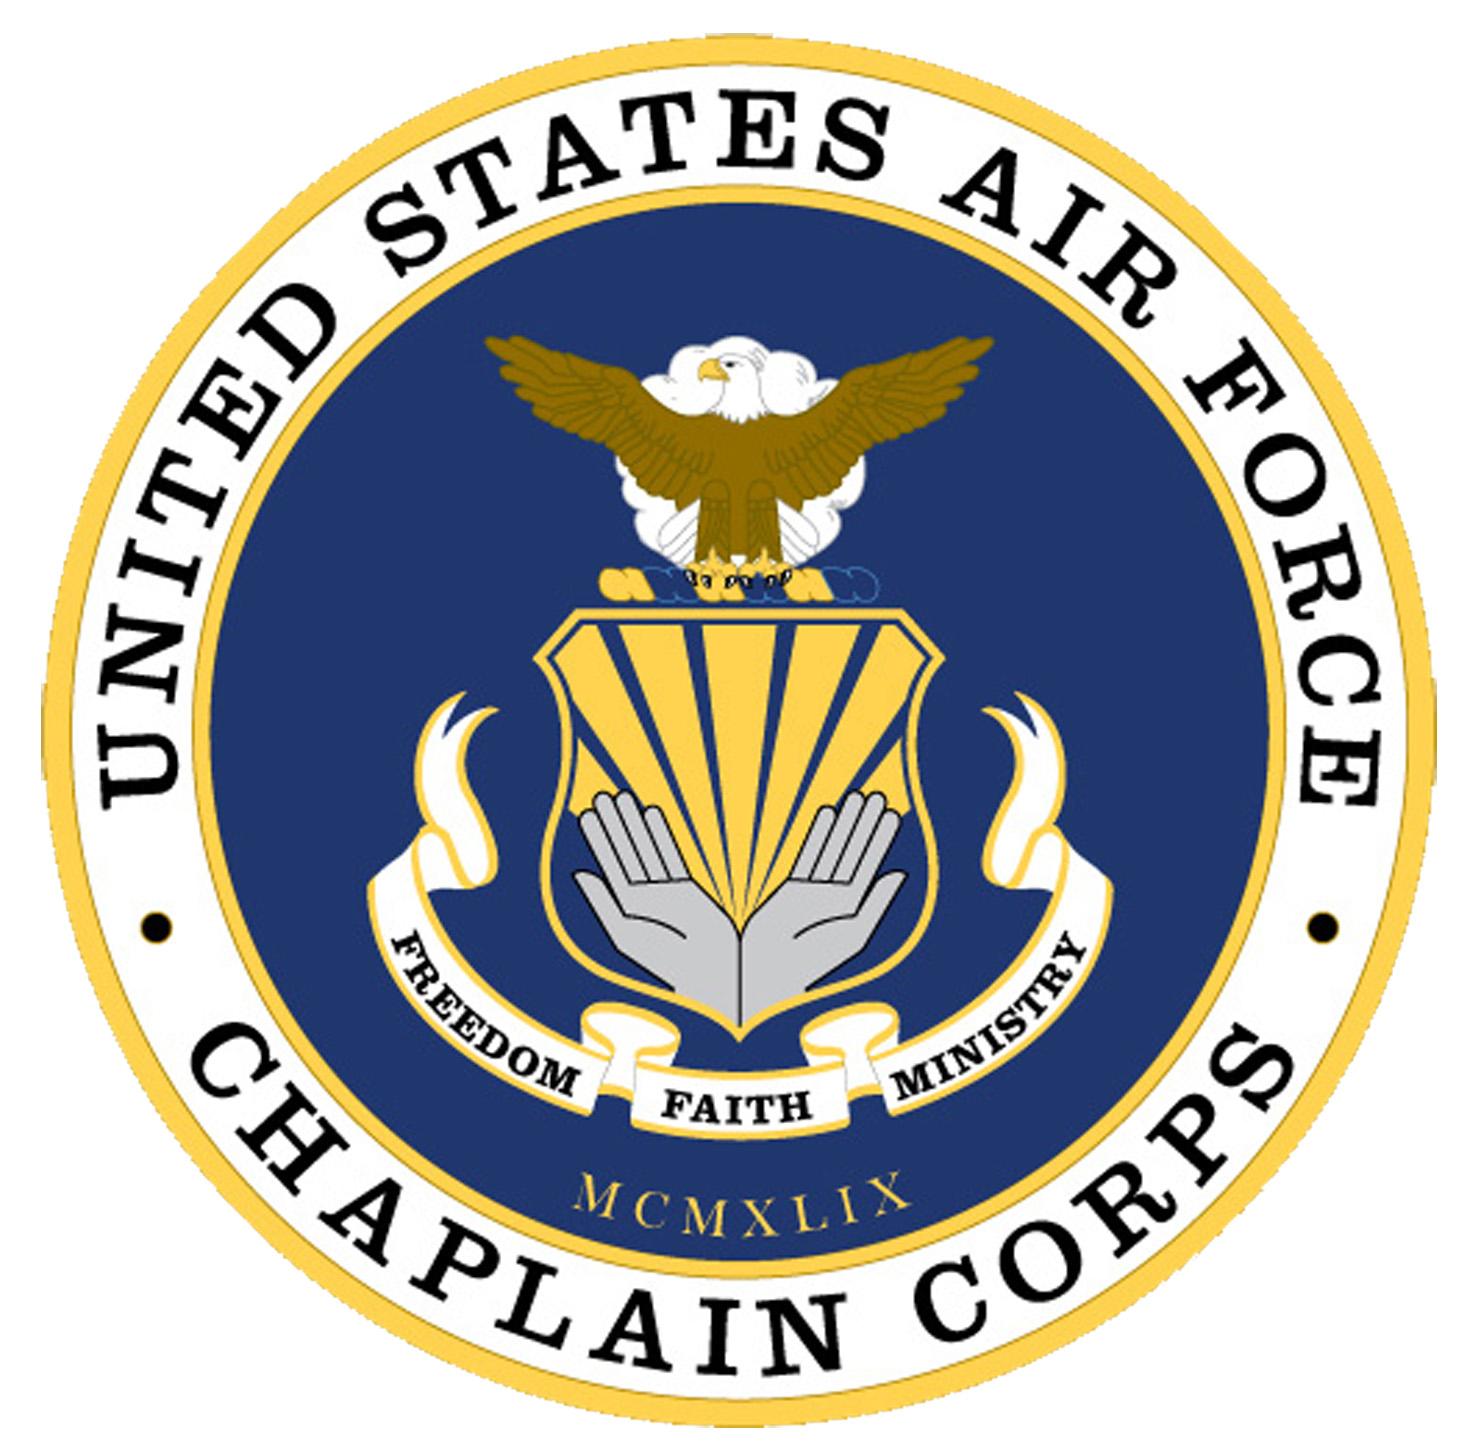 the United States Air Force Chaplain Corps official shield